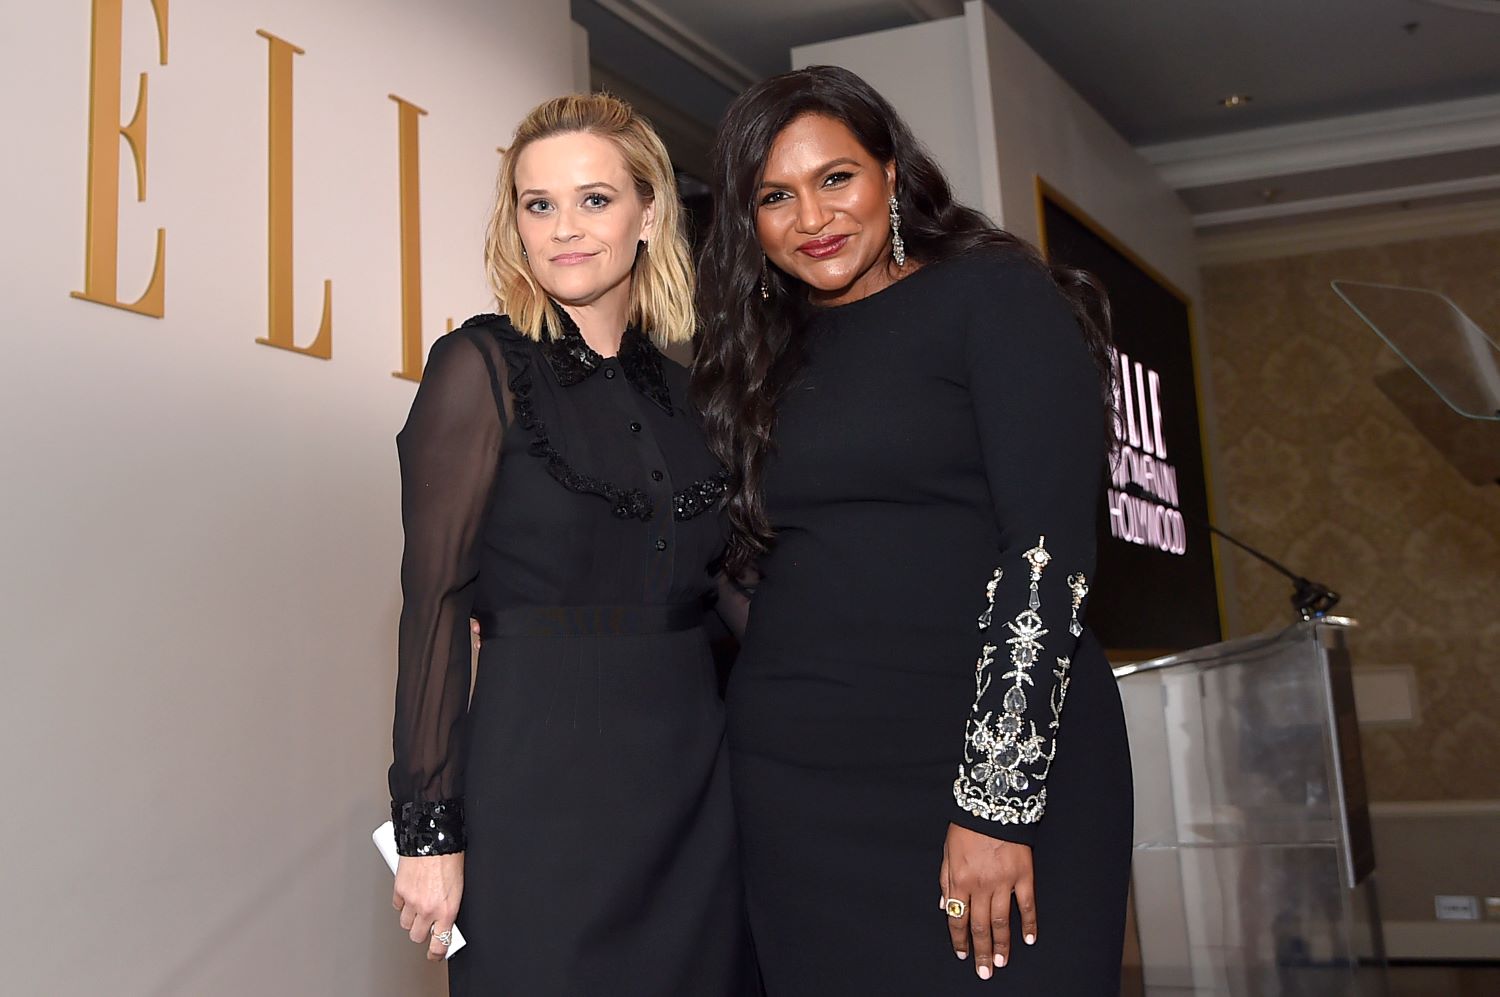 Reese Witherspoon and Mindy Kaling